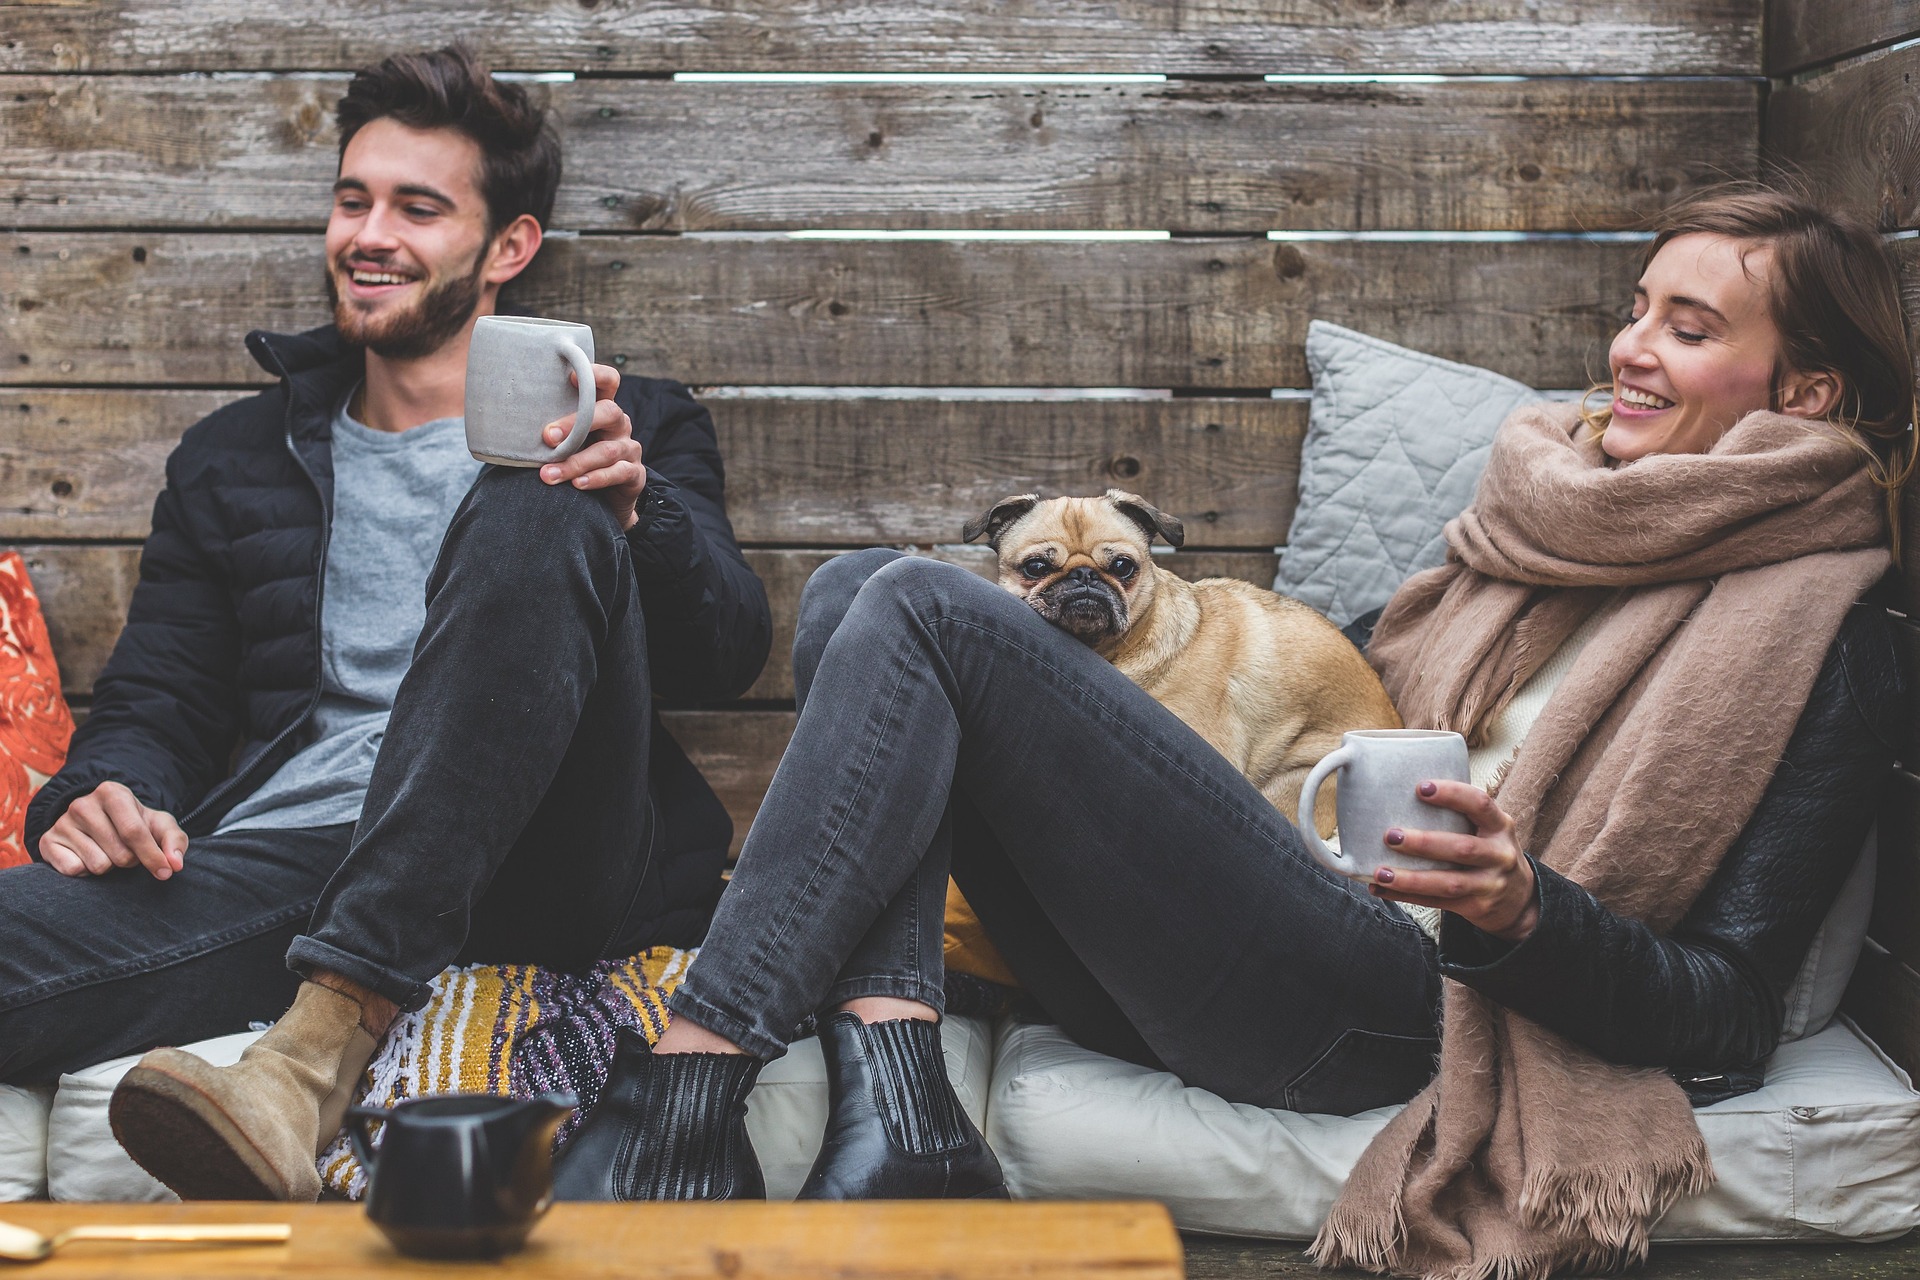 Relationships and mental health are linked, as these people bond over coffee.